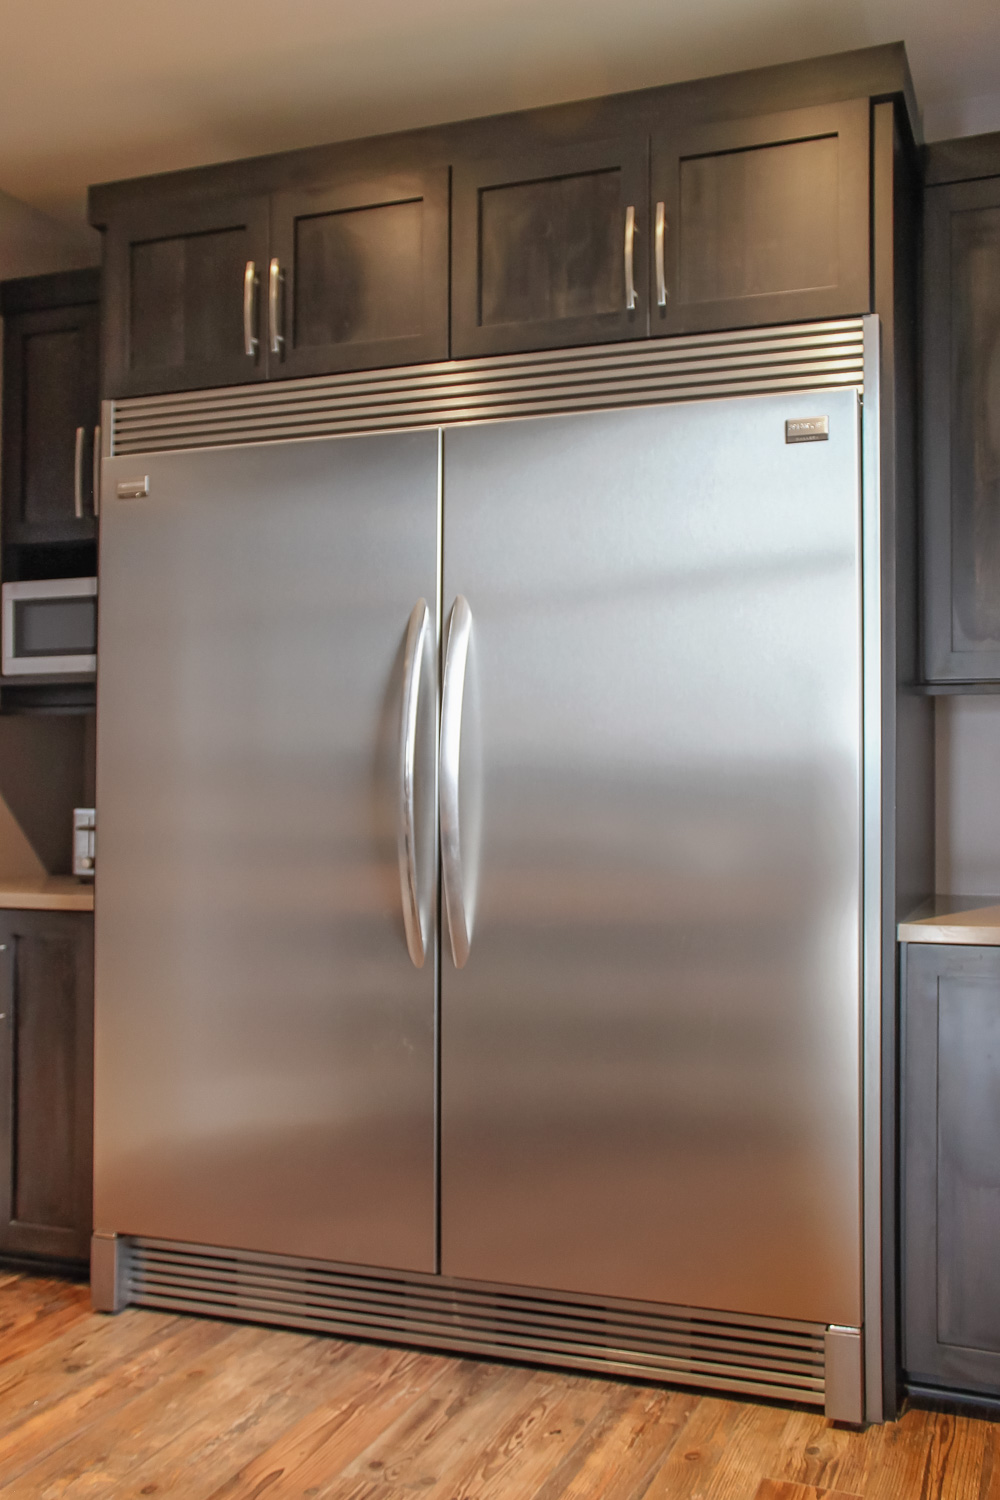 All About Counter Depth Refrigerators for a Kitchen Remodel — Degnan